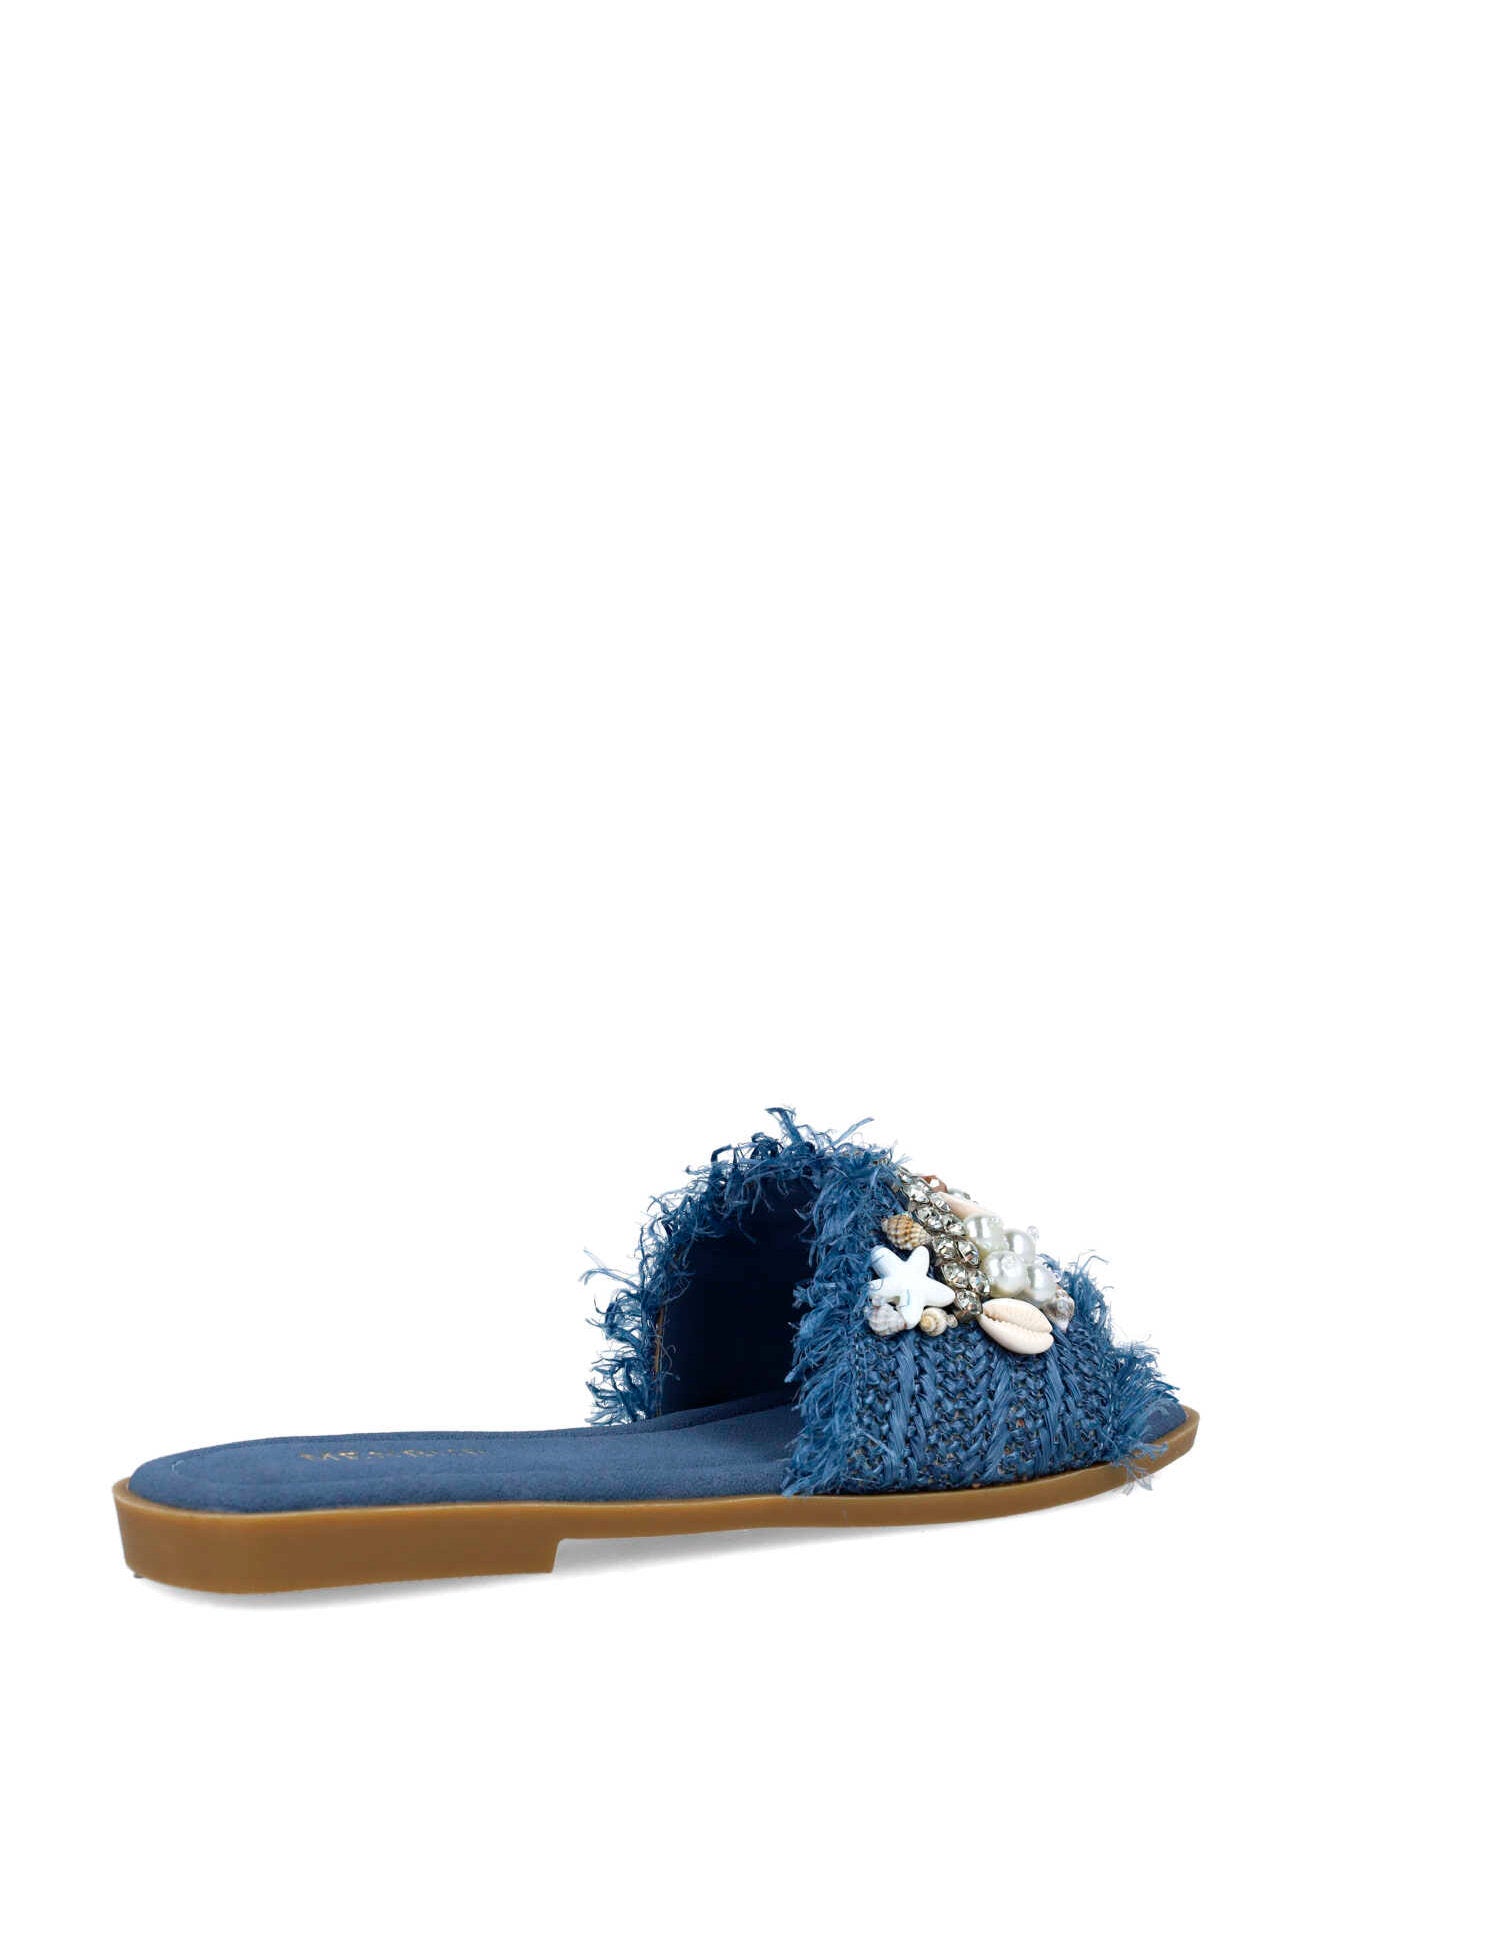 Blue Slippers With Embellishments_25386_51_03